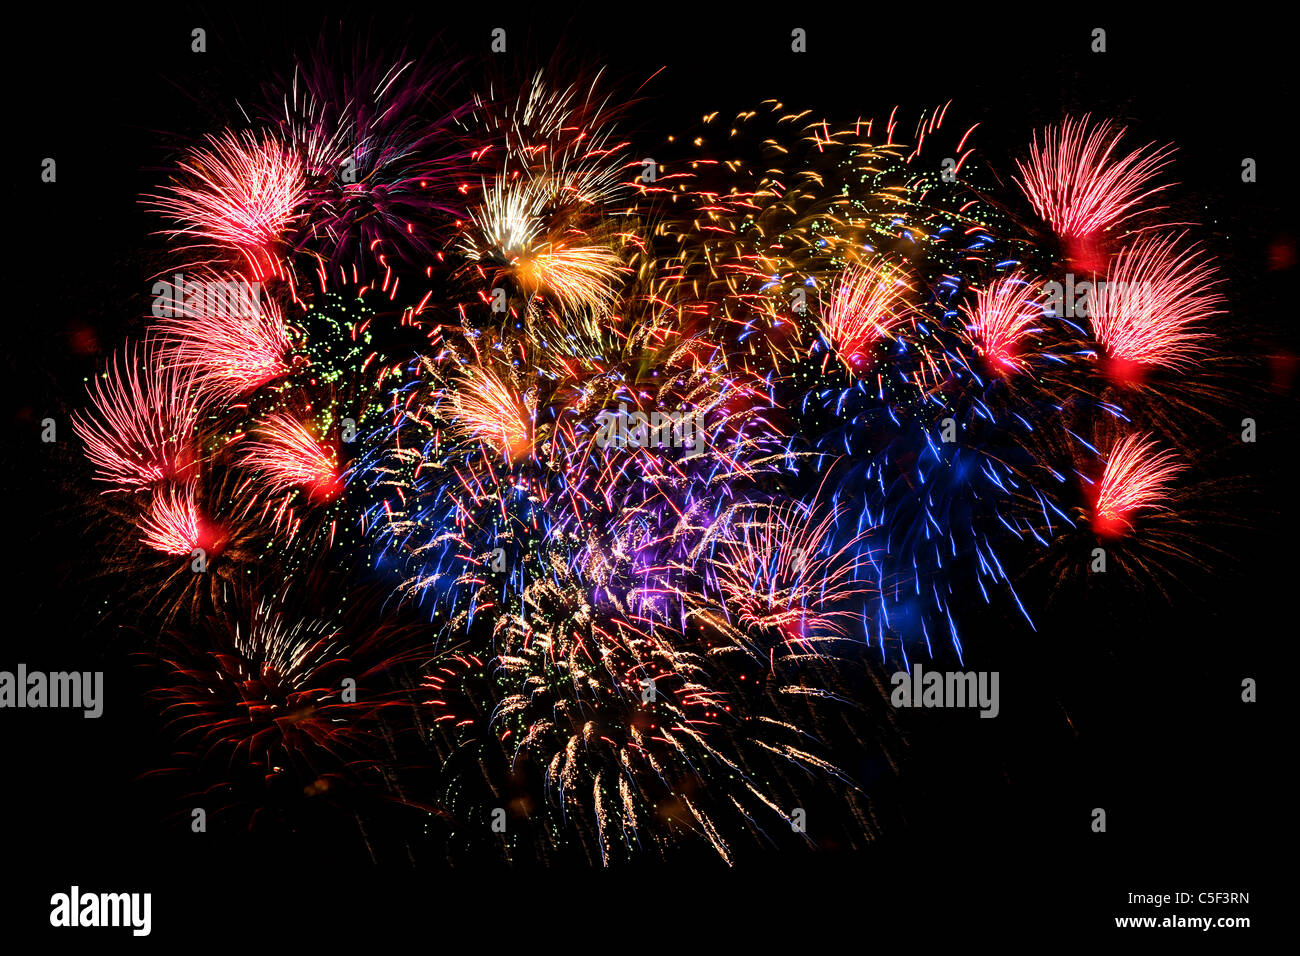 Multicolor fireworks exploding in the night sky Stock Photo